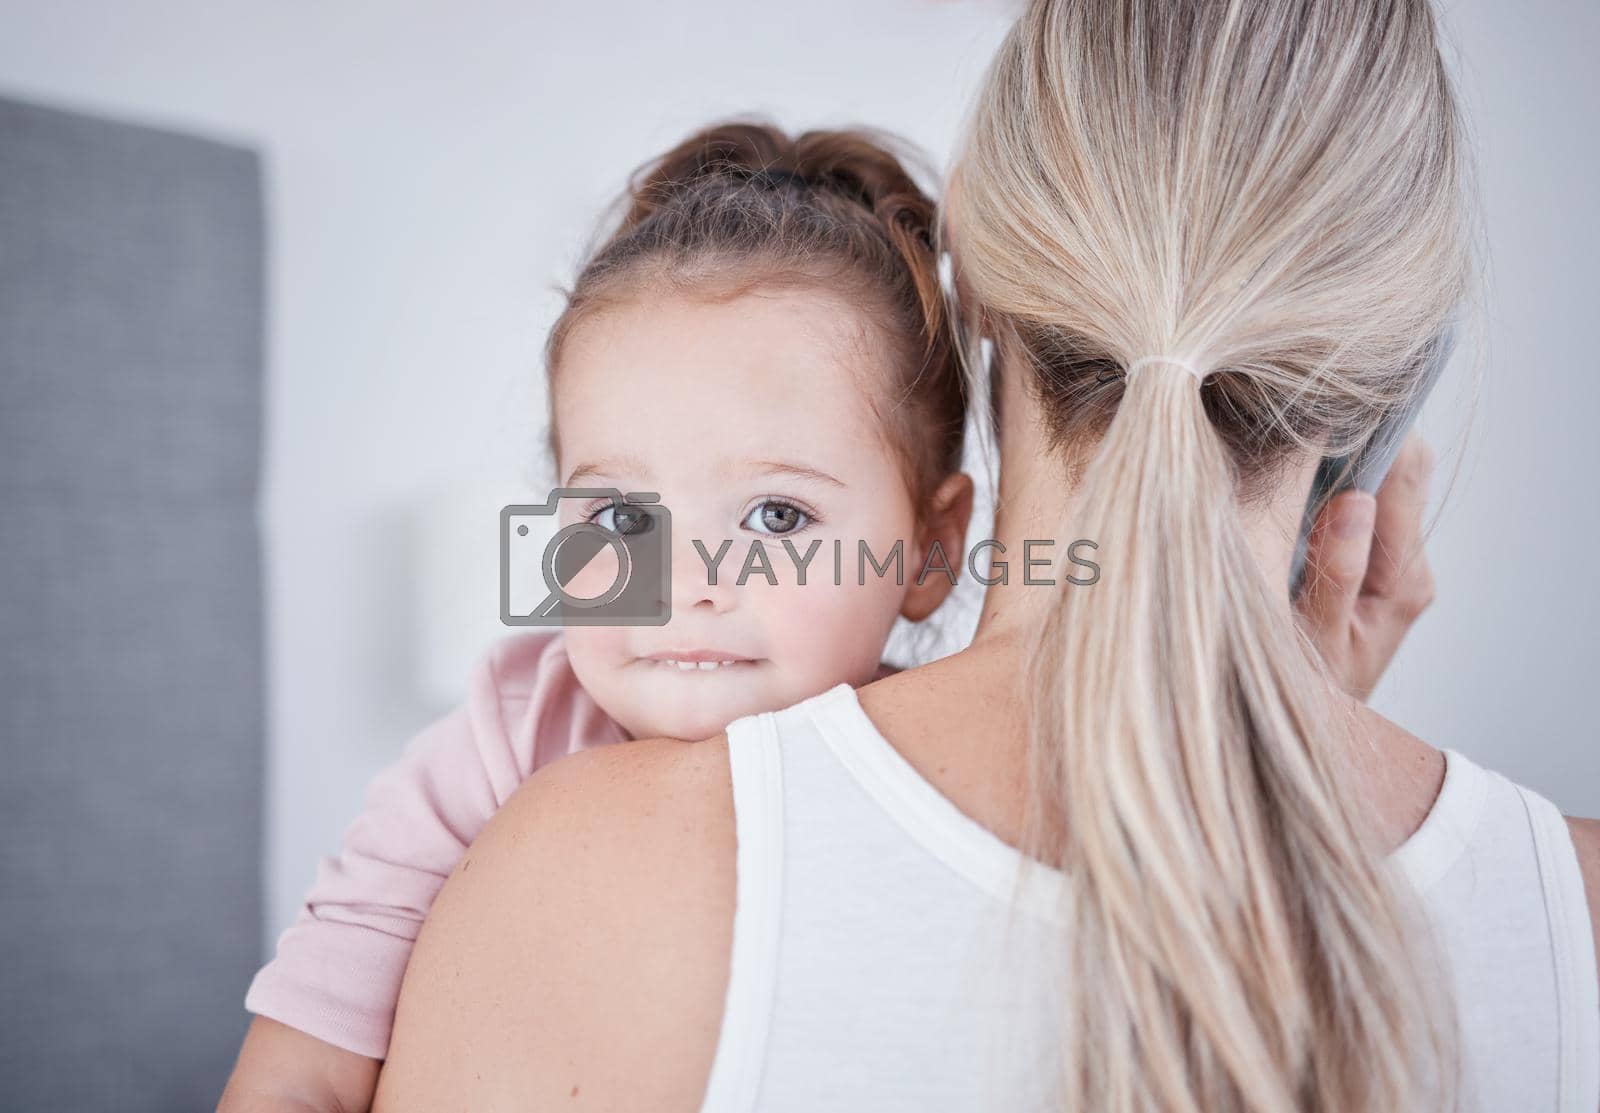 Baby, communication and mom talking in phone call conversation while multitasking on business call. Work from home single mother holding a little girl, child or kid while speaking on a mobile.